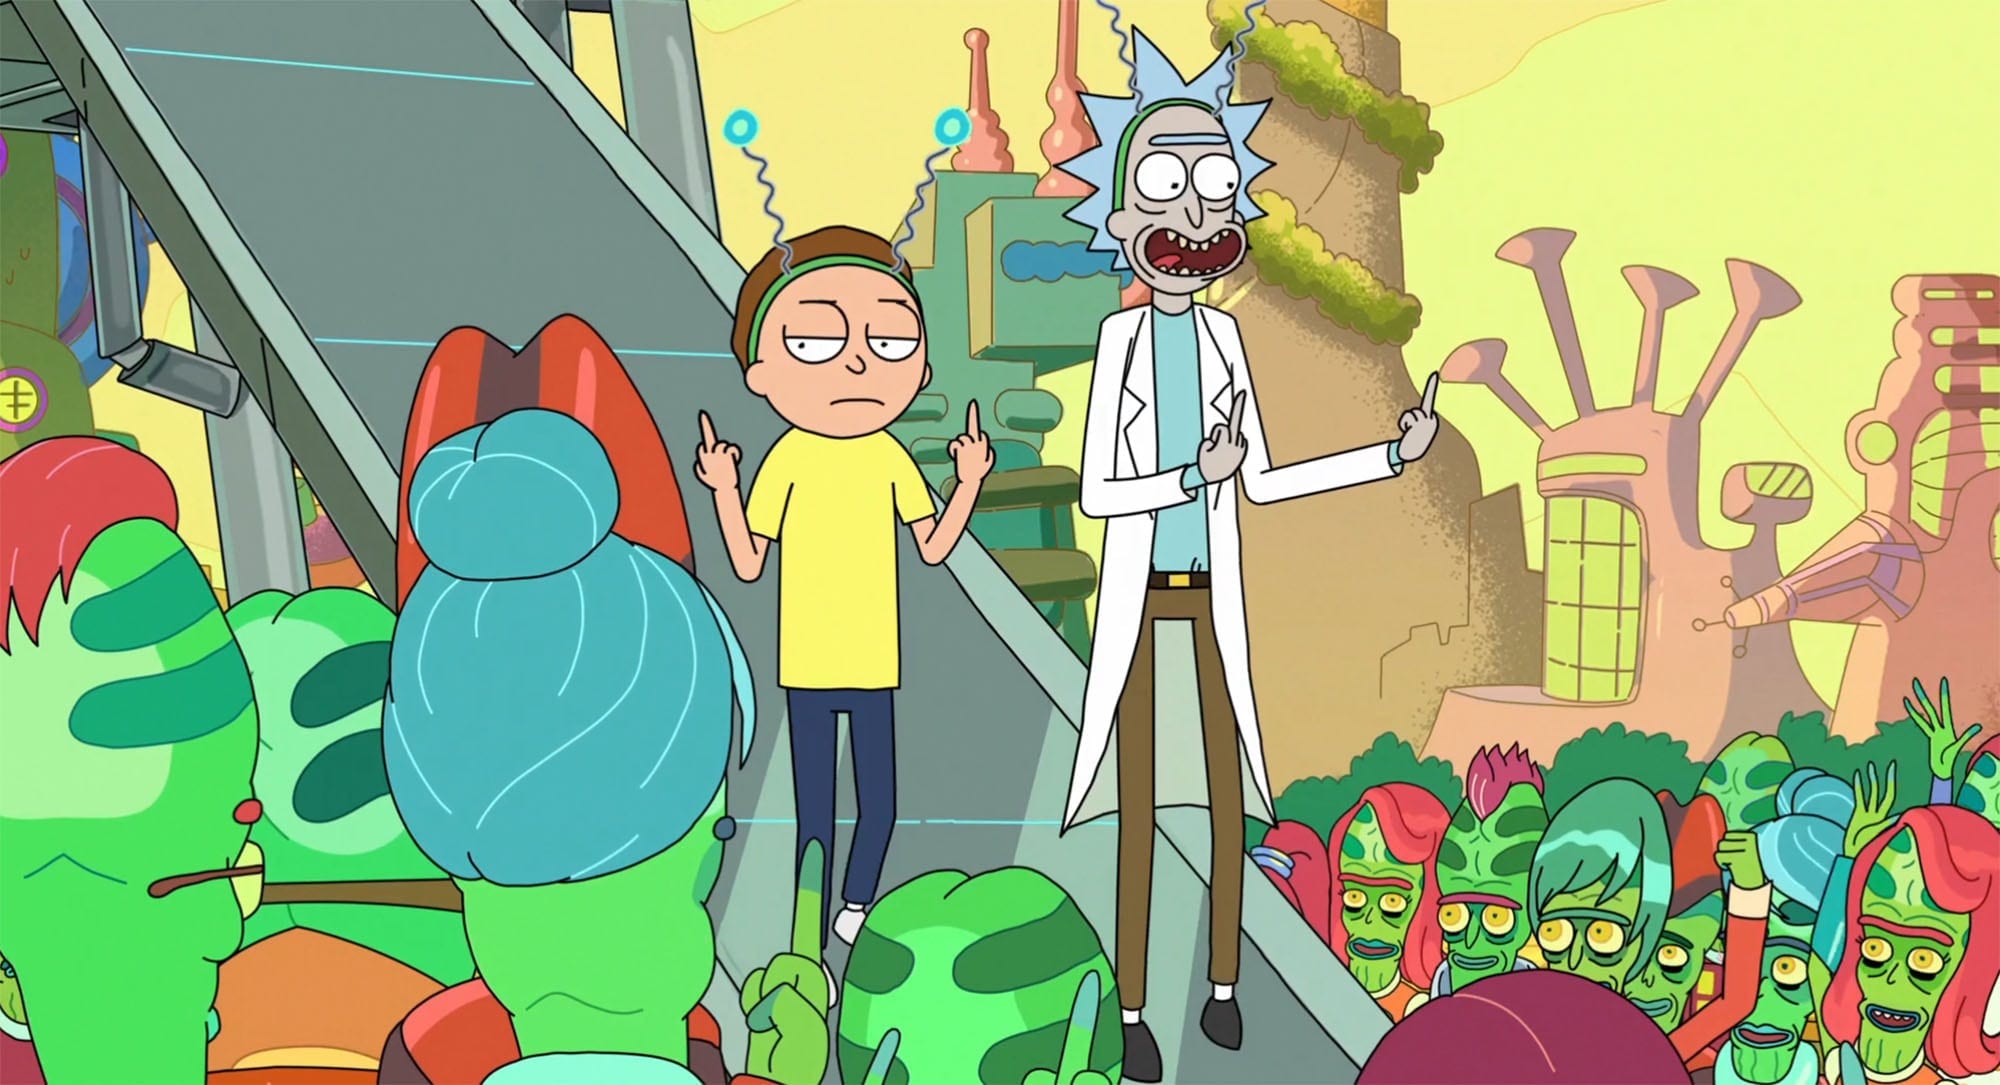 If you ever find yourself aboard the Space Cruiser, you might just benefit from our handy little travel guide to the 'Rick and Morty' multiverse.